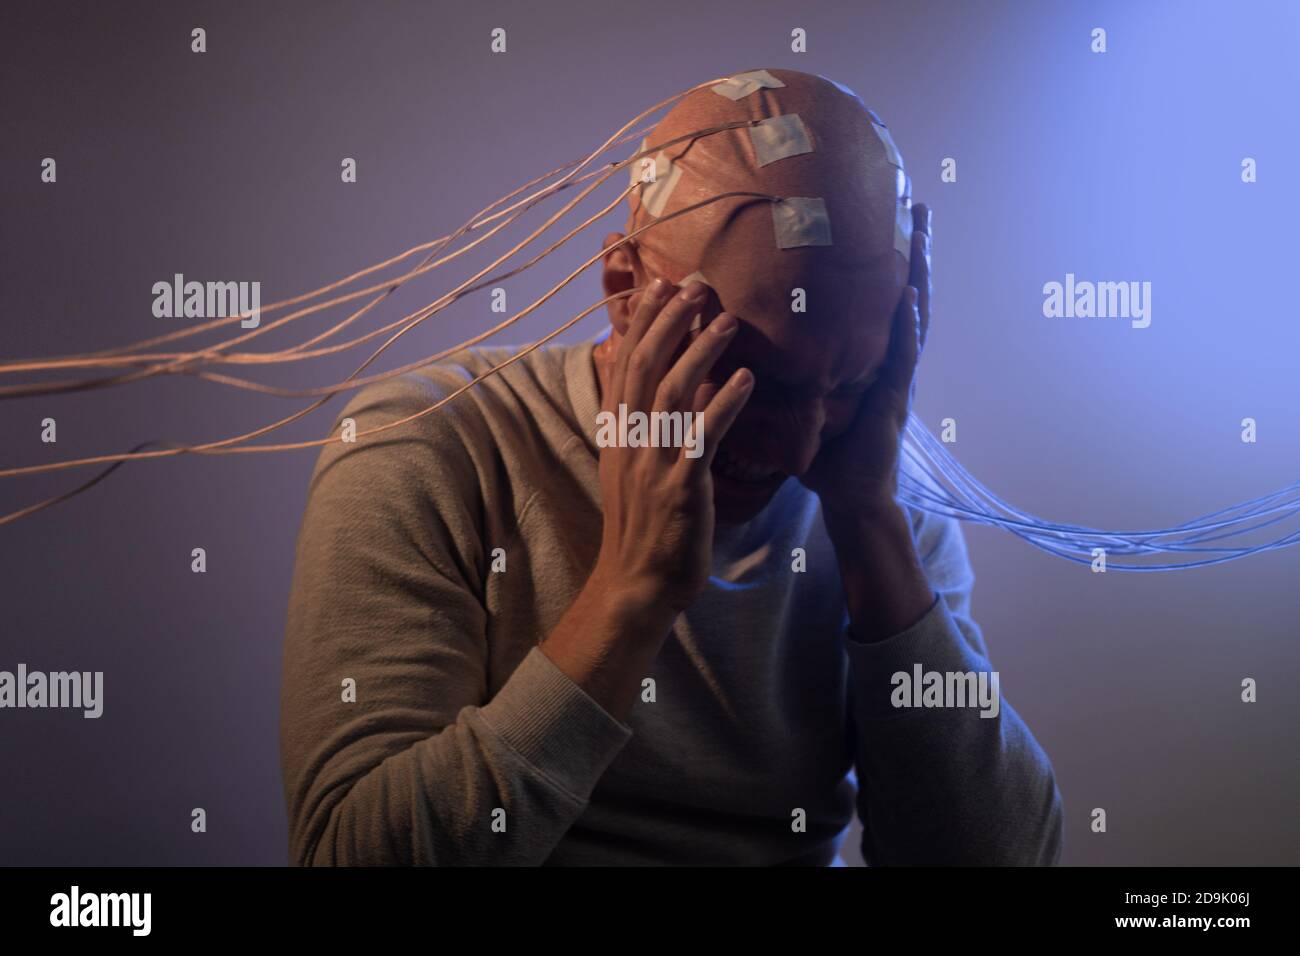 Person with implants in head experiences stress and horror. New technologies, augmented brain, neuro interface and virtuality. Stock Photo